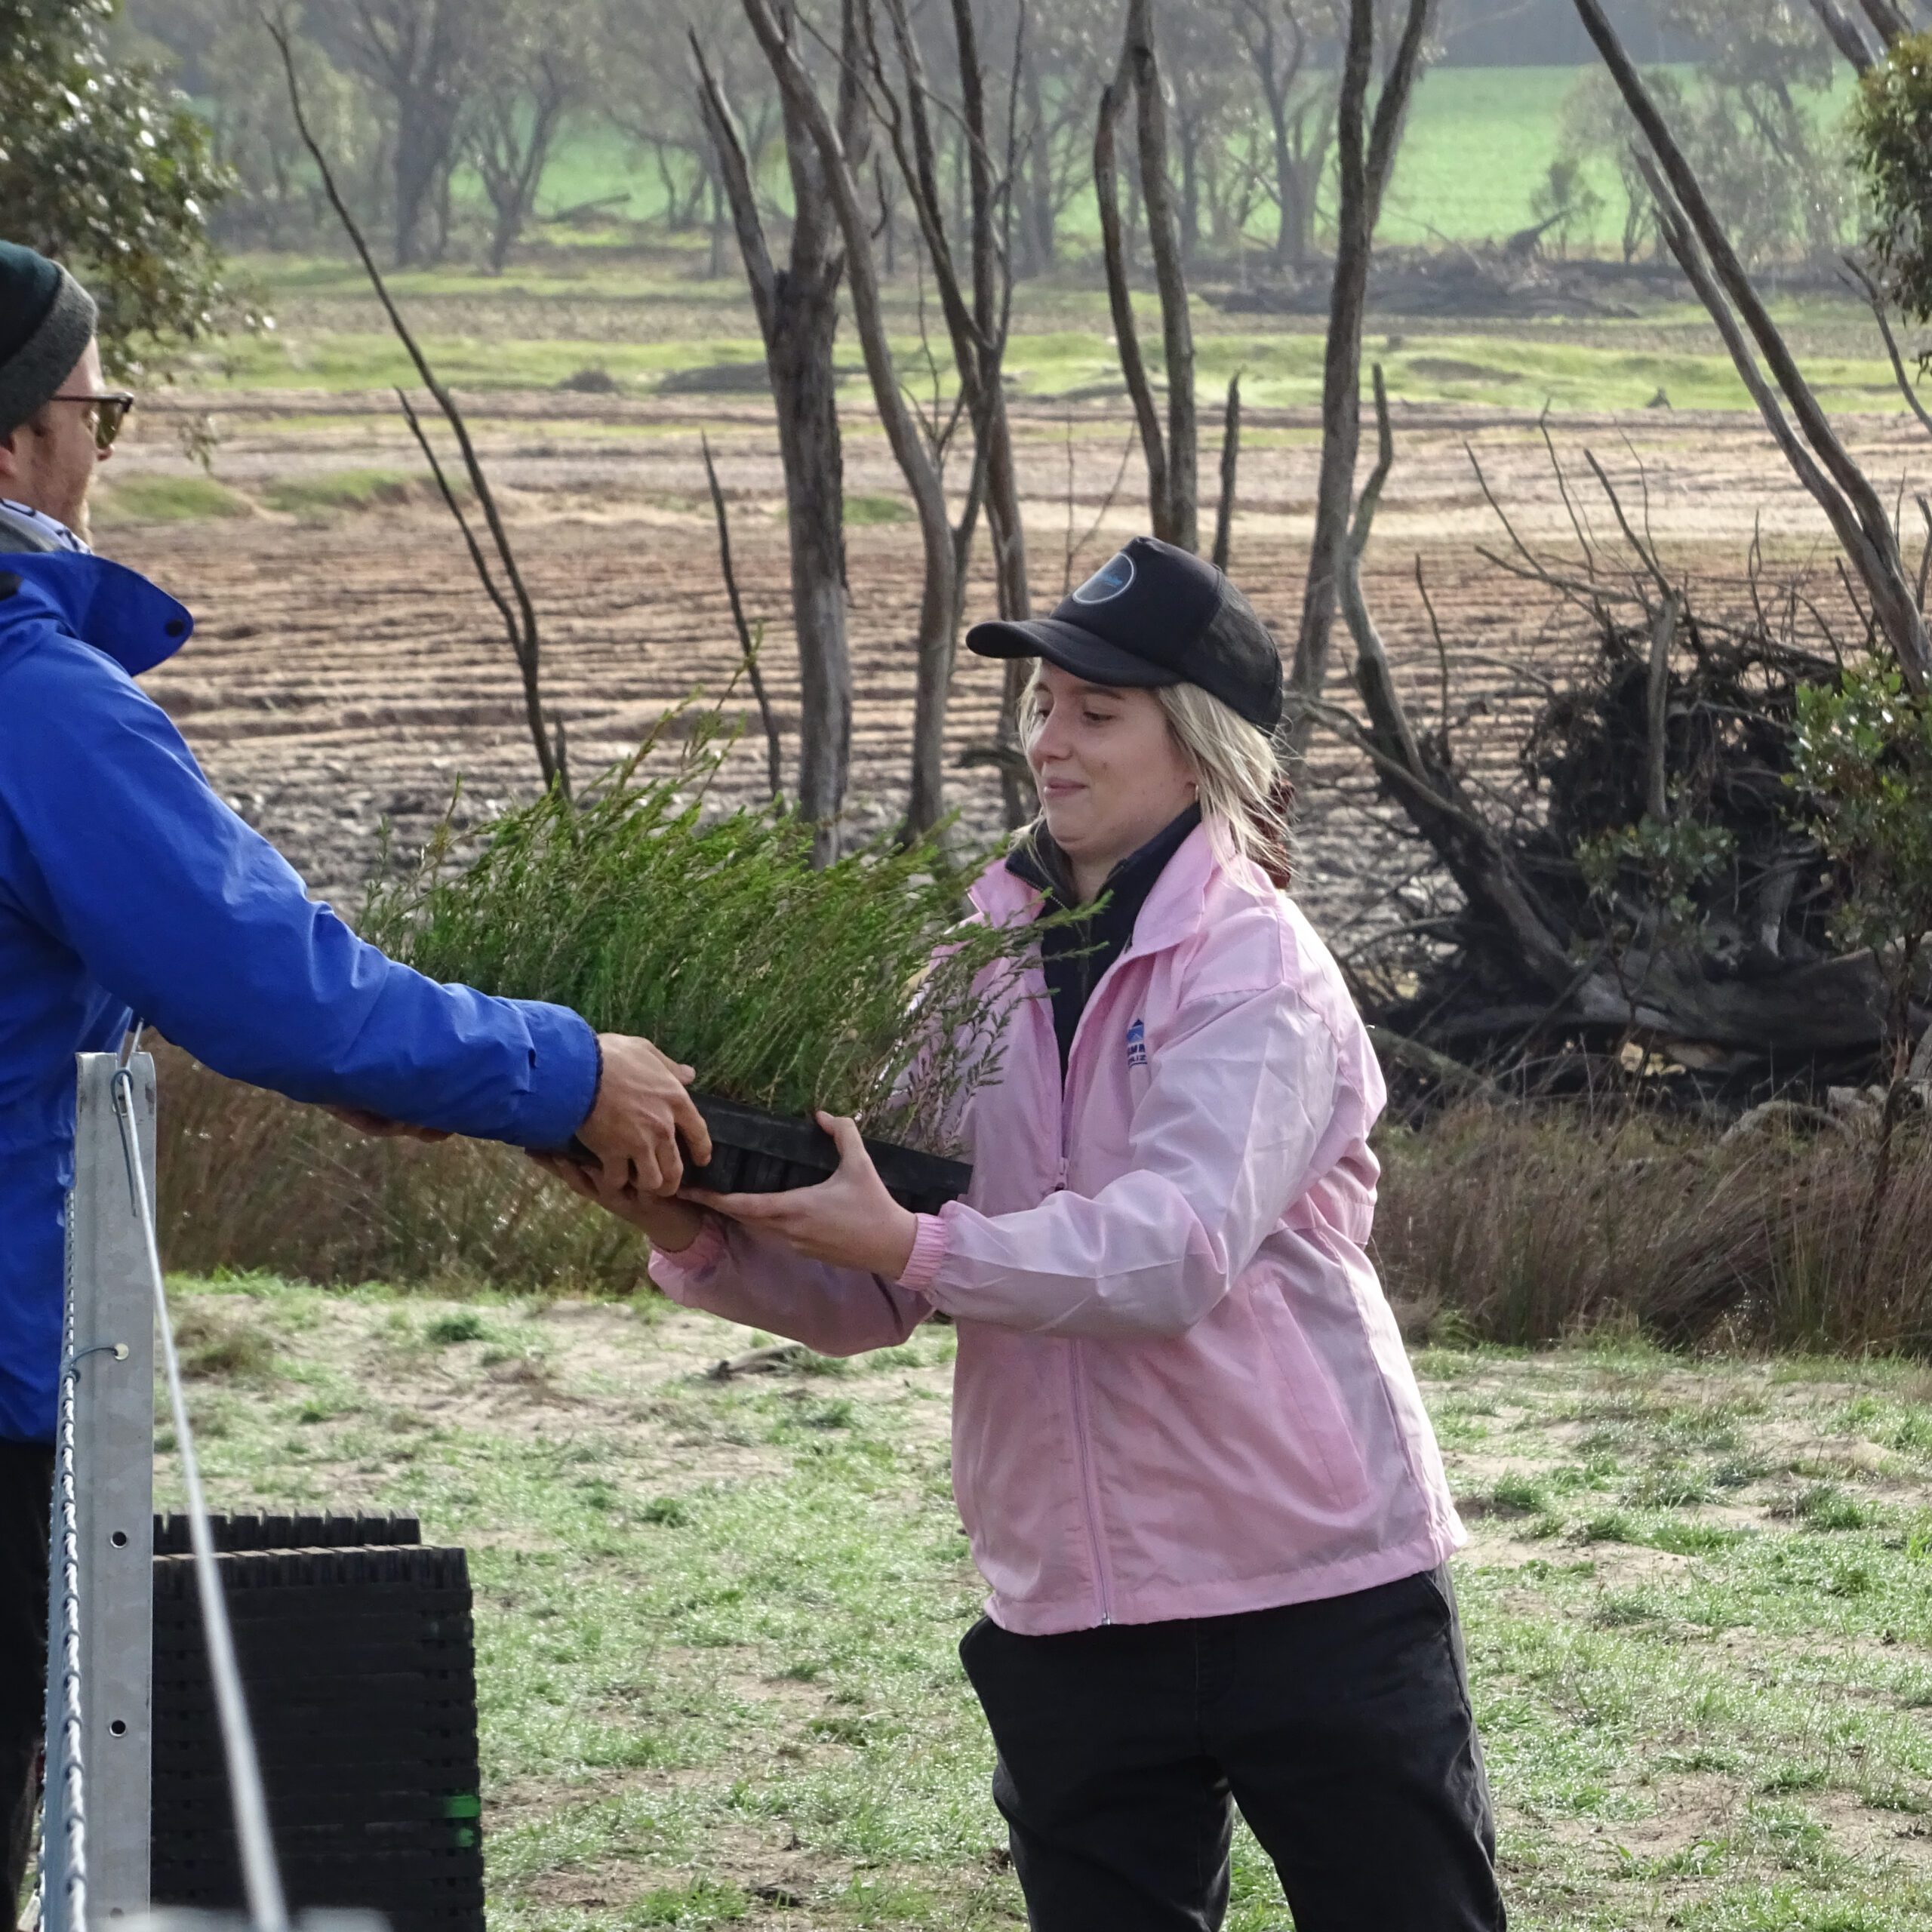 Man in blue jacket passing a tray of native seedlings to a girl in a pink jacket and black hat